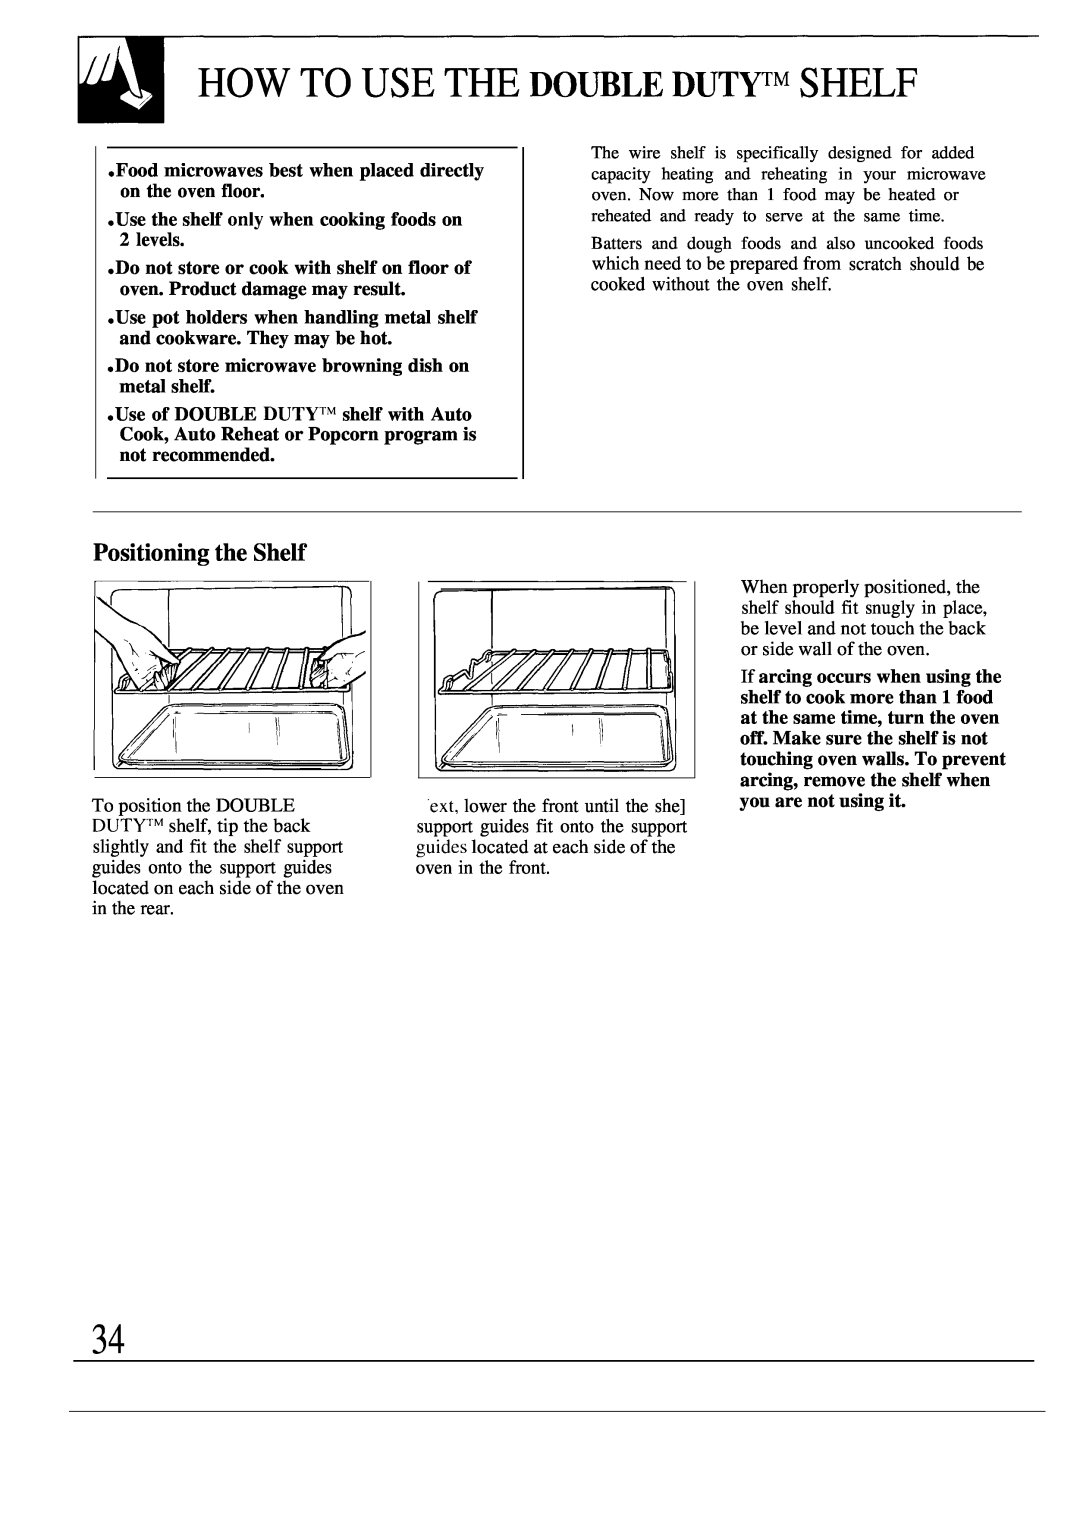 GE JE1468L How To Use The Do~Le Dutytm Shelf, Positioning the Shelf, Use the shelf only when cooking foods on 2 levels 